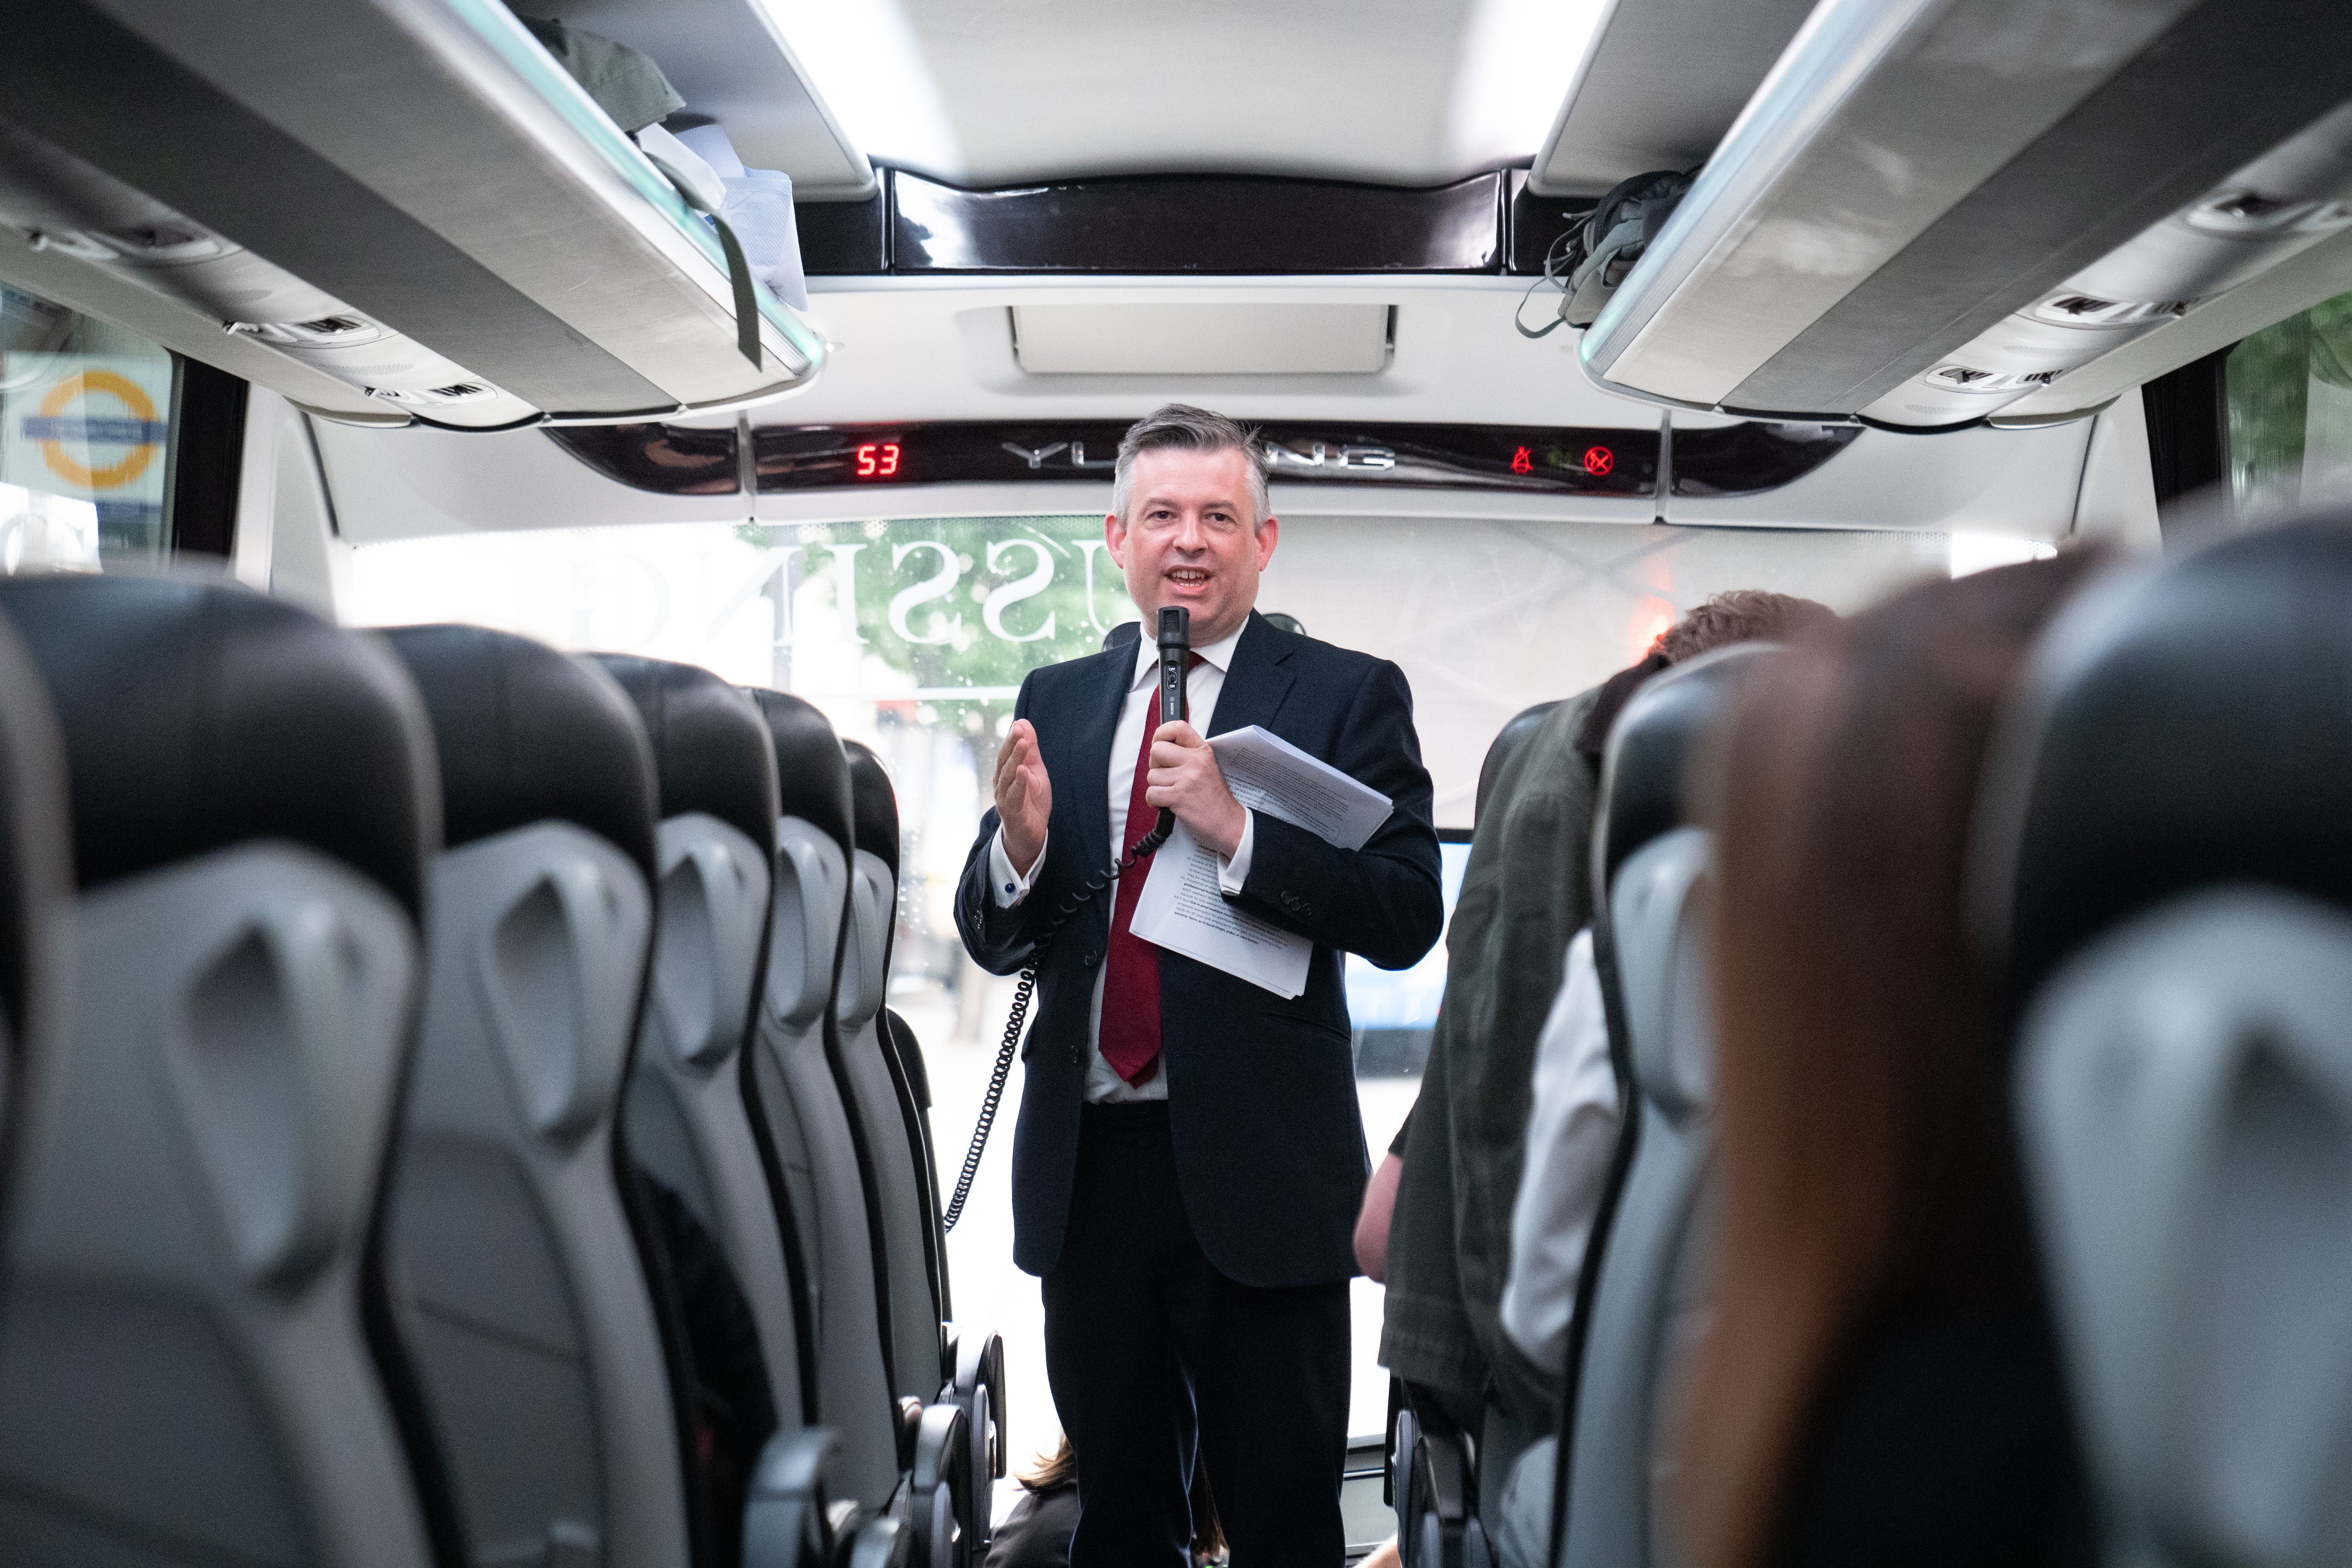 All aboard! Shadow paymaster general Jonathan Ashworth briefed journalists on the Labour Party battle bus as it headed out on the campaign trail (Stefan Rousseau/PA)